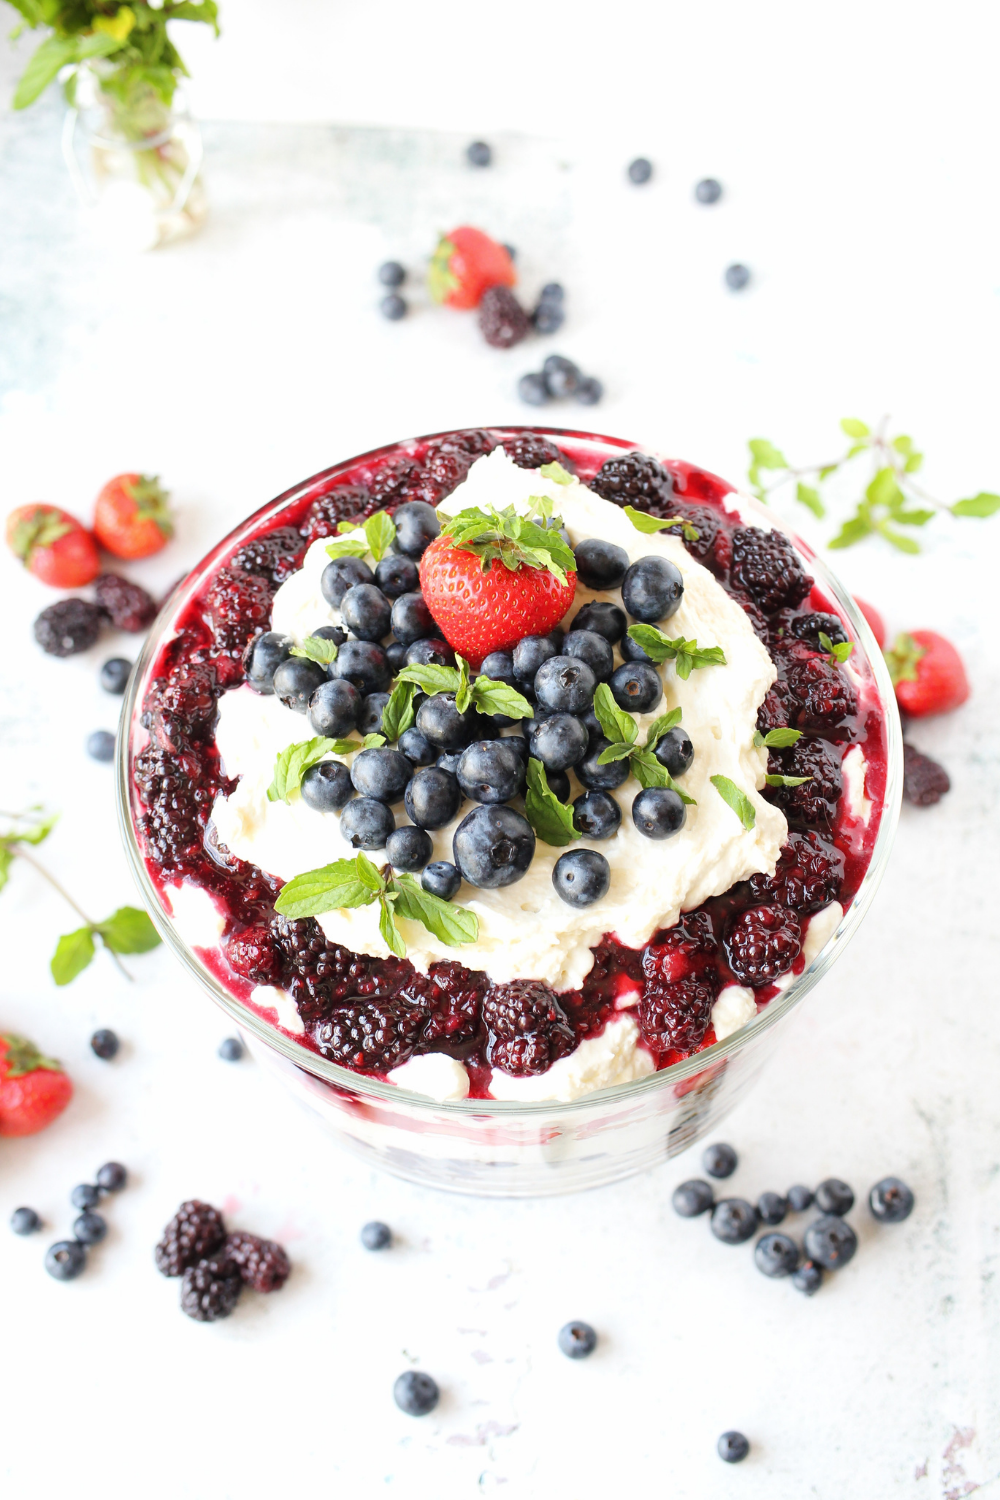 easy keto dessert that comes together quickly and is perfect for summer holidays like Memorial day or the 4th of july